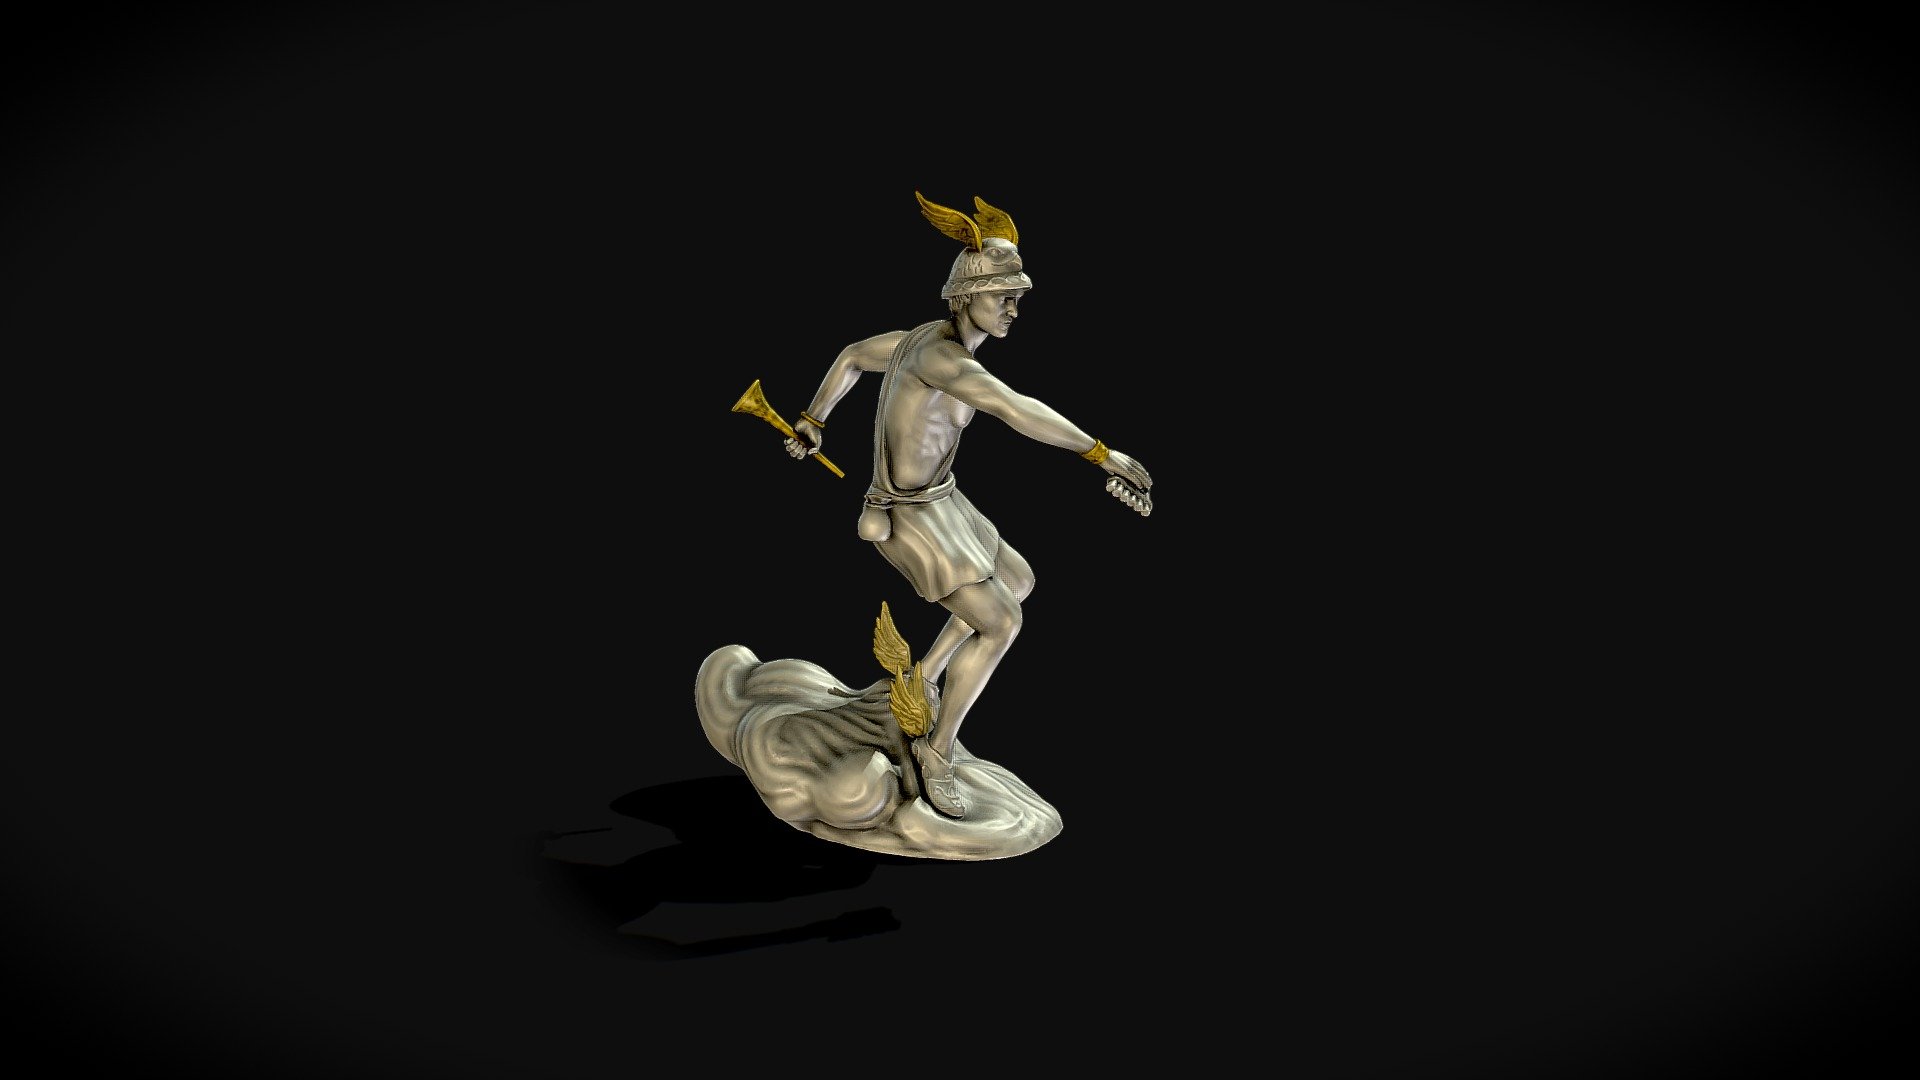 The Statue of greek god Hermes , this statue is for 3D print and paint. 

The zip file contains the 3D model in stl and OBJ formats, also the model in a single piece and segmented into parts for easier printing.

HERMES was the Olympian god of flocks and flocks, travelers and hospitality, roads and commerce, theft and cunning, heralds and diplomacy, language and writing, athletic competitions and gymnasiums, astronomy and astrology. He was the personal herald and messenger of Zeus, king of the gods, and also the guide of the dead who led souls to the underworld 3d model